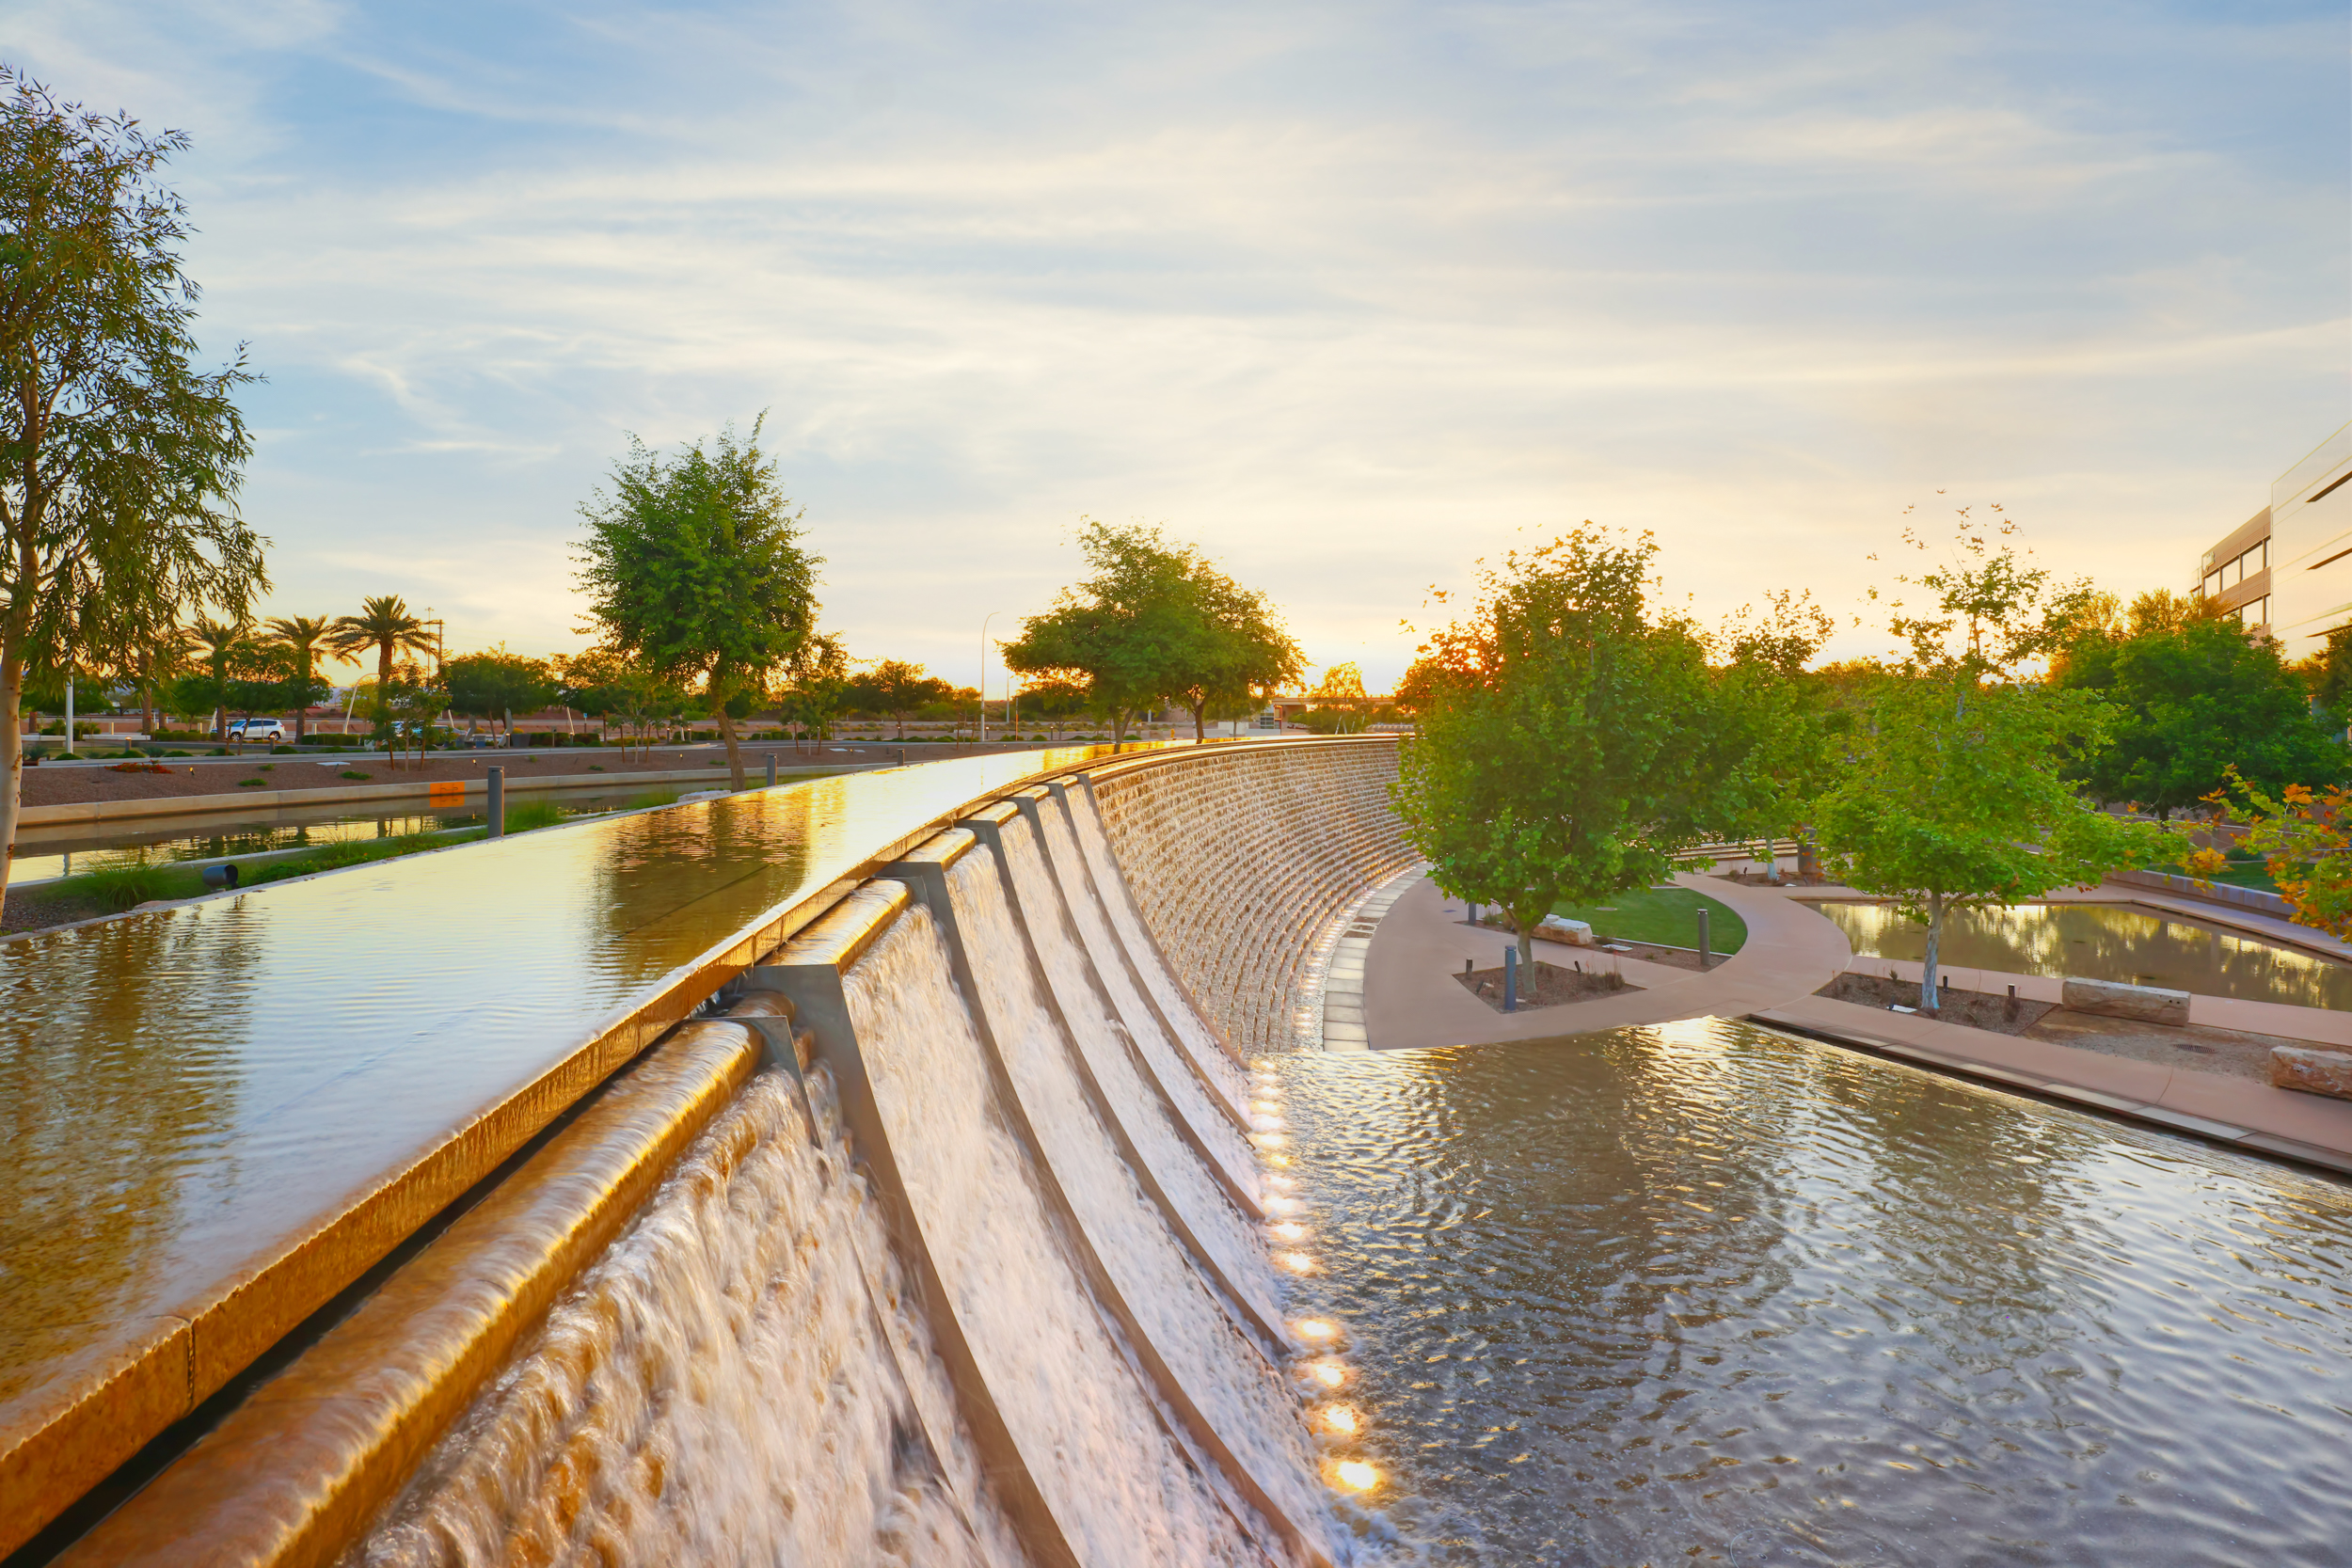 Sunset over a tranquil urban canal with flowing water, lighted paths, and lush greenery on both sides.